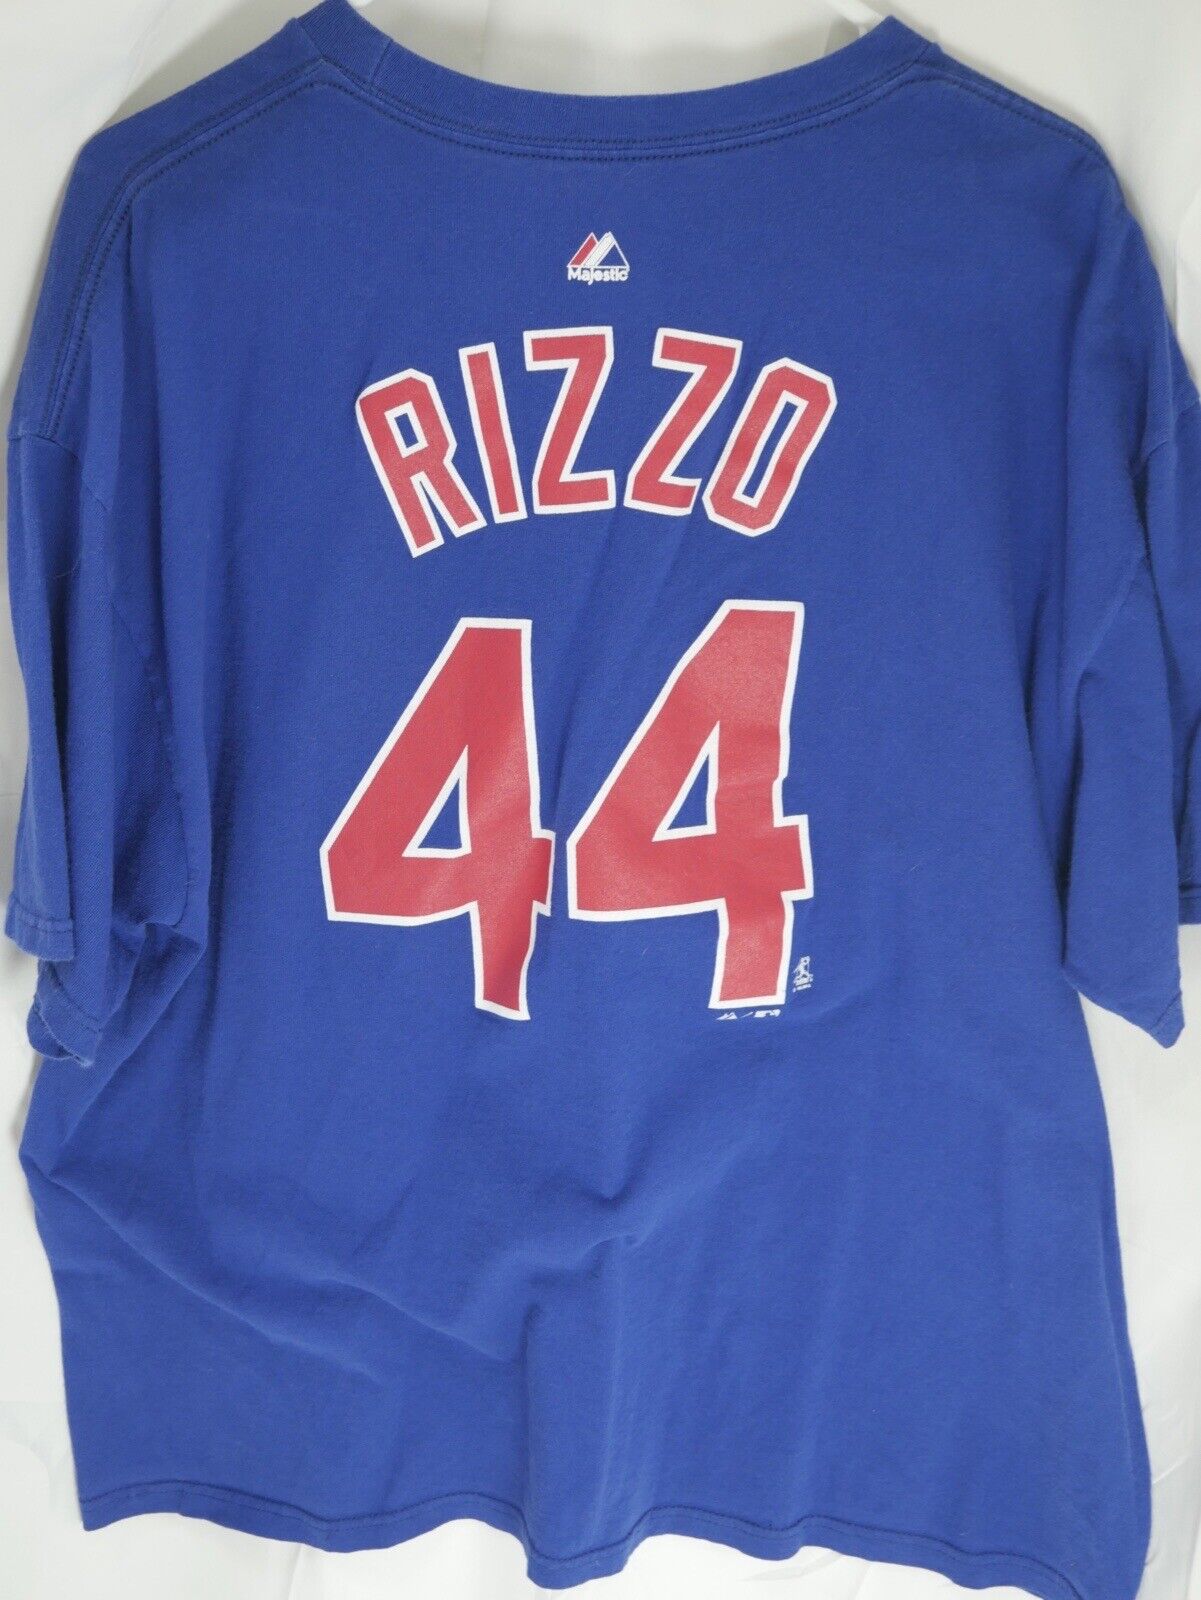 MLB Nike Chicago Cubs #44 Anthony Rizzo Gray Name & Number T-Shirt